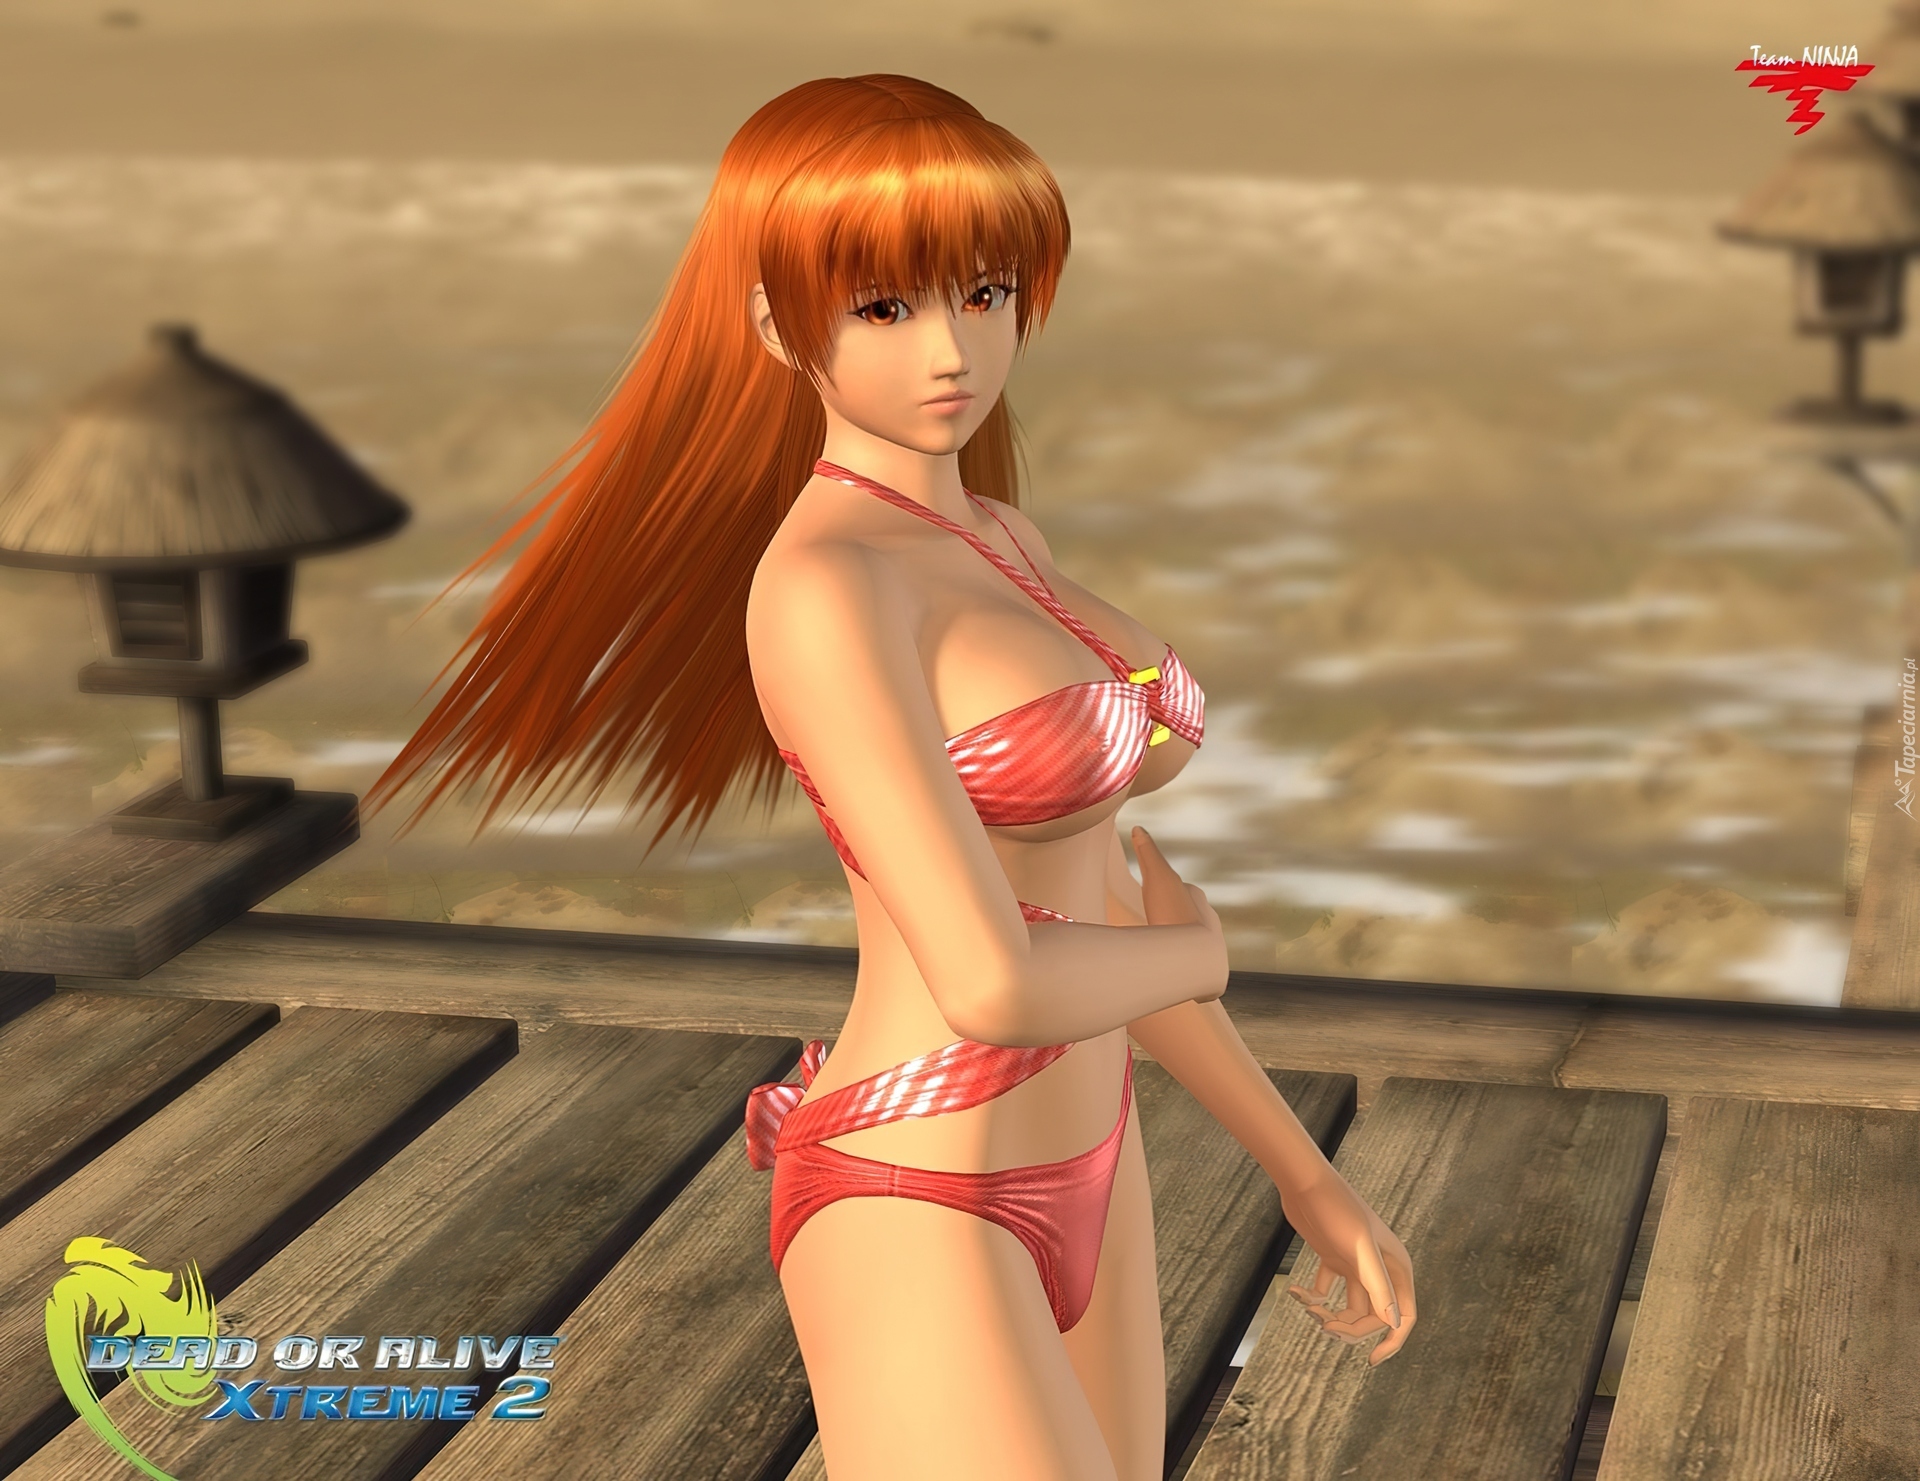 164819_dead_or_alive_xtreme_2_kasumi.jpg